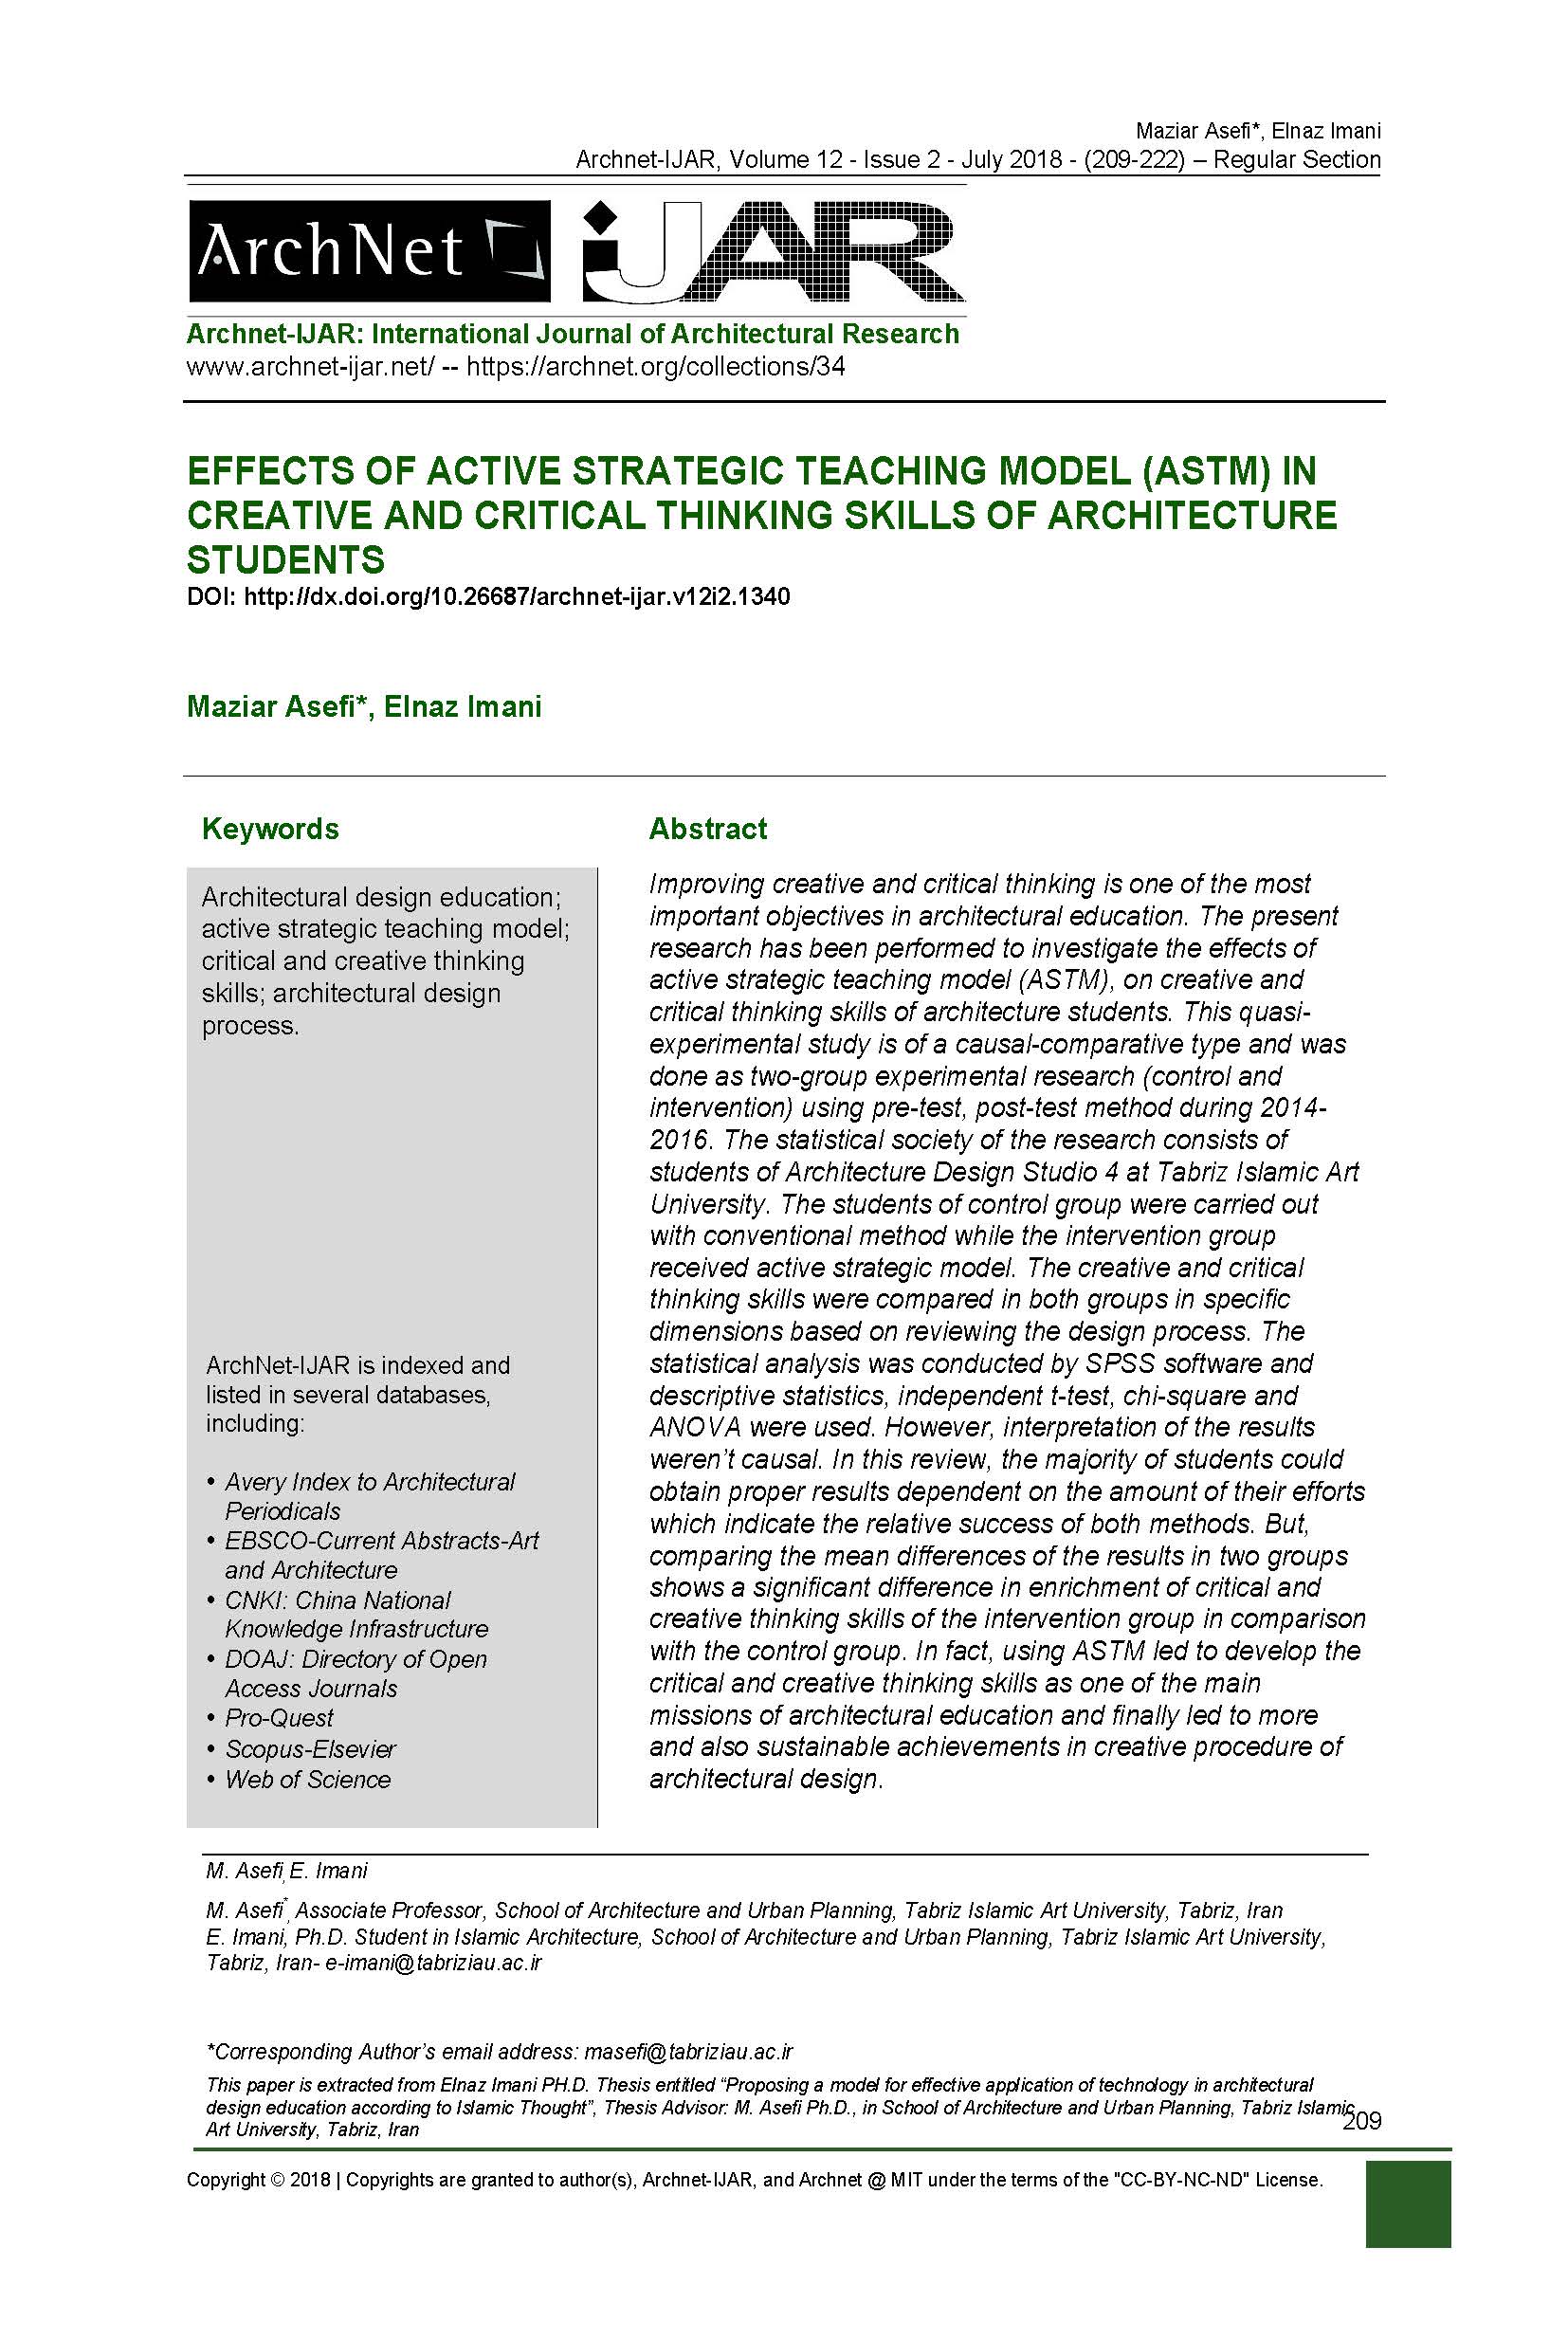 Effects of Active Strategic Teaching Model (astm) In Creative and Critical Thinking Skills of Architecture Students